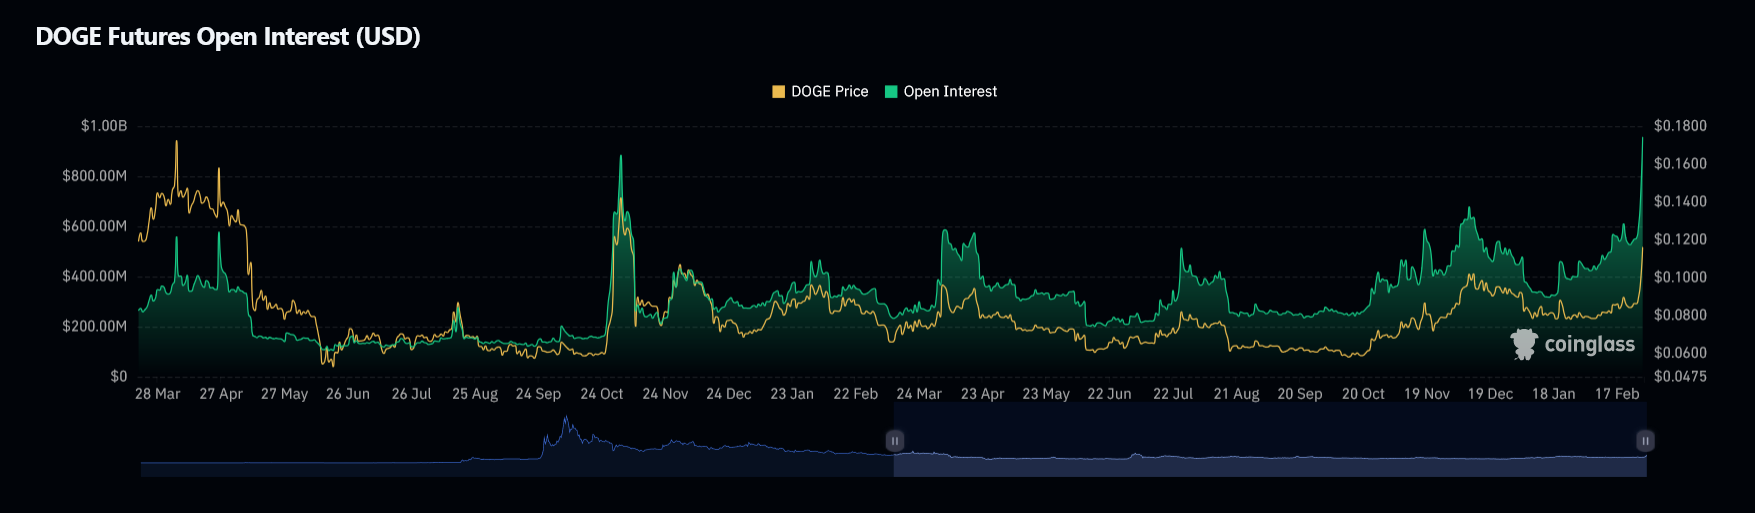 Dogecoin (DOGE) futures betting volume.